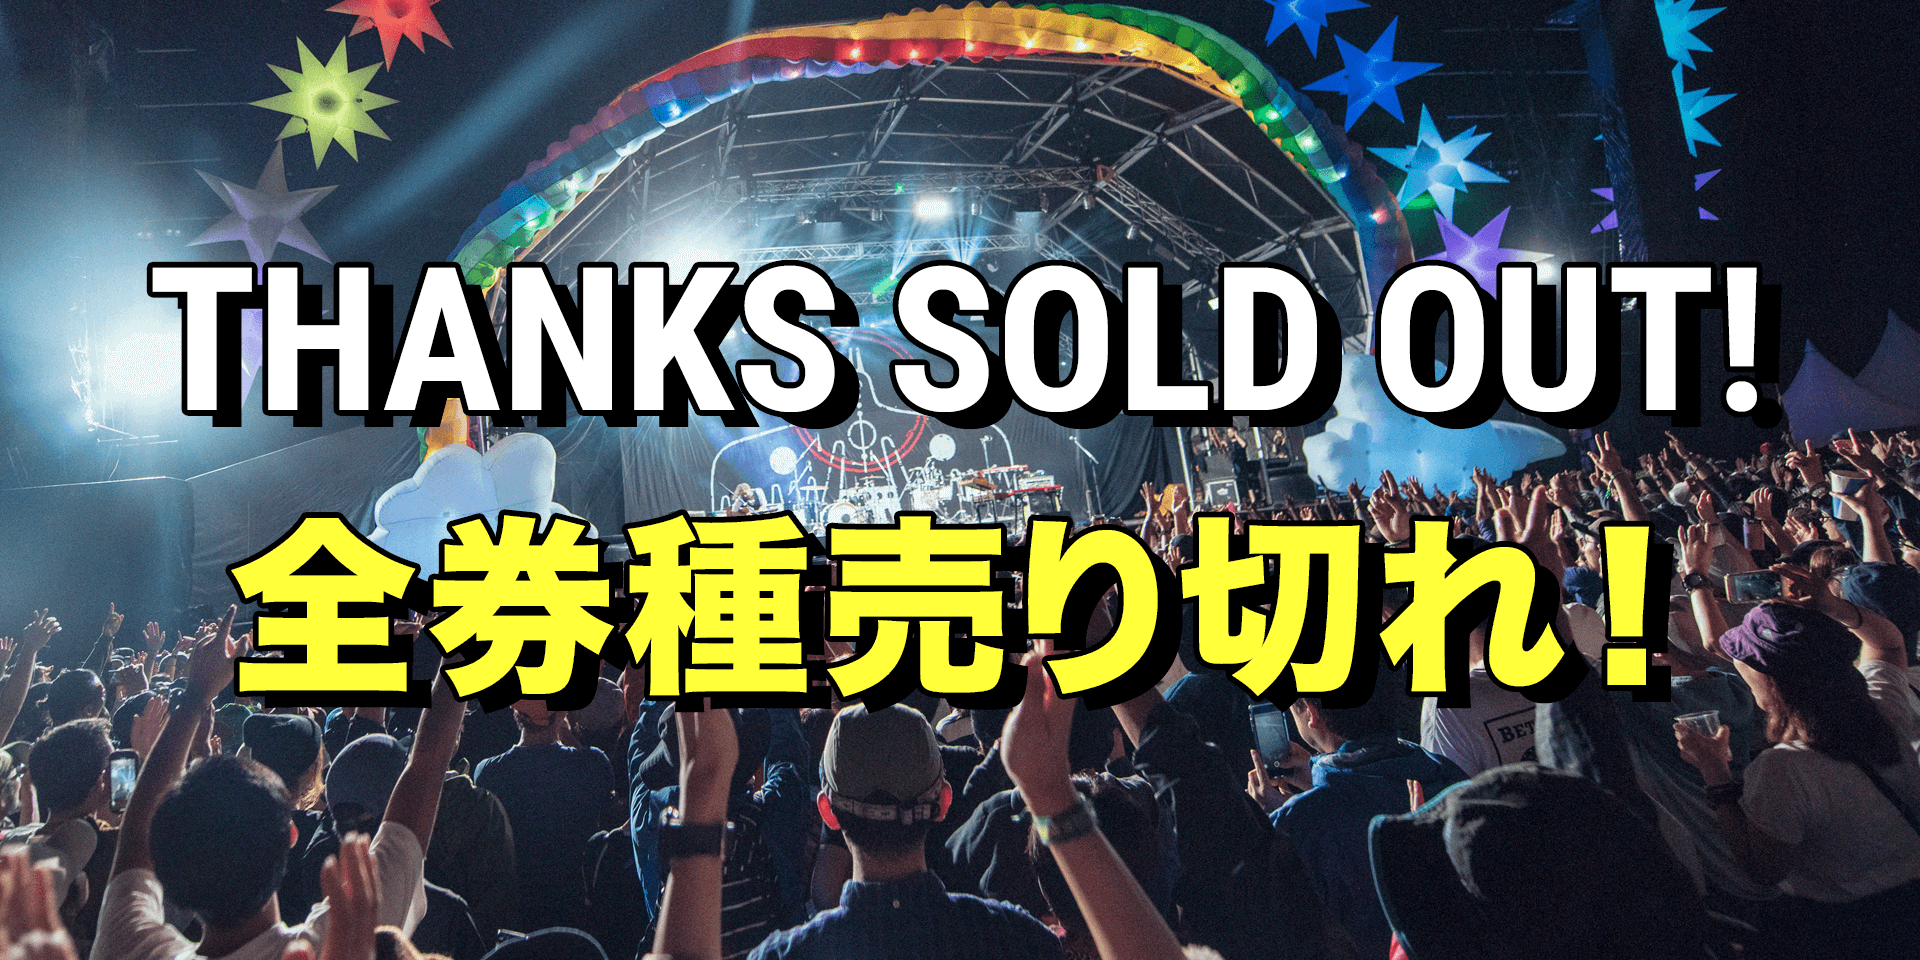 THANKS SOLD OUT! 全券種売り切れ！！イメージ